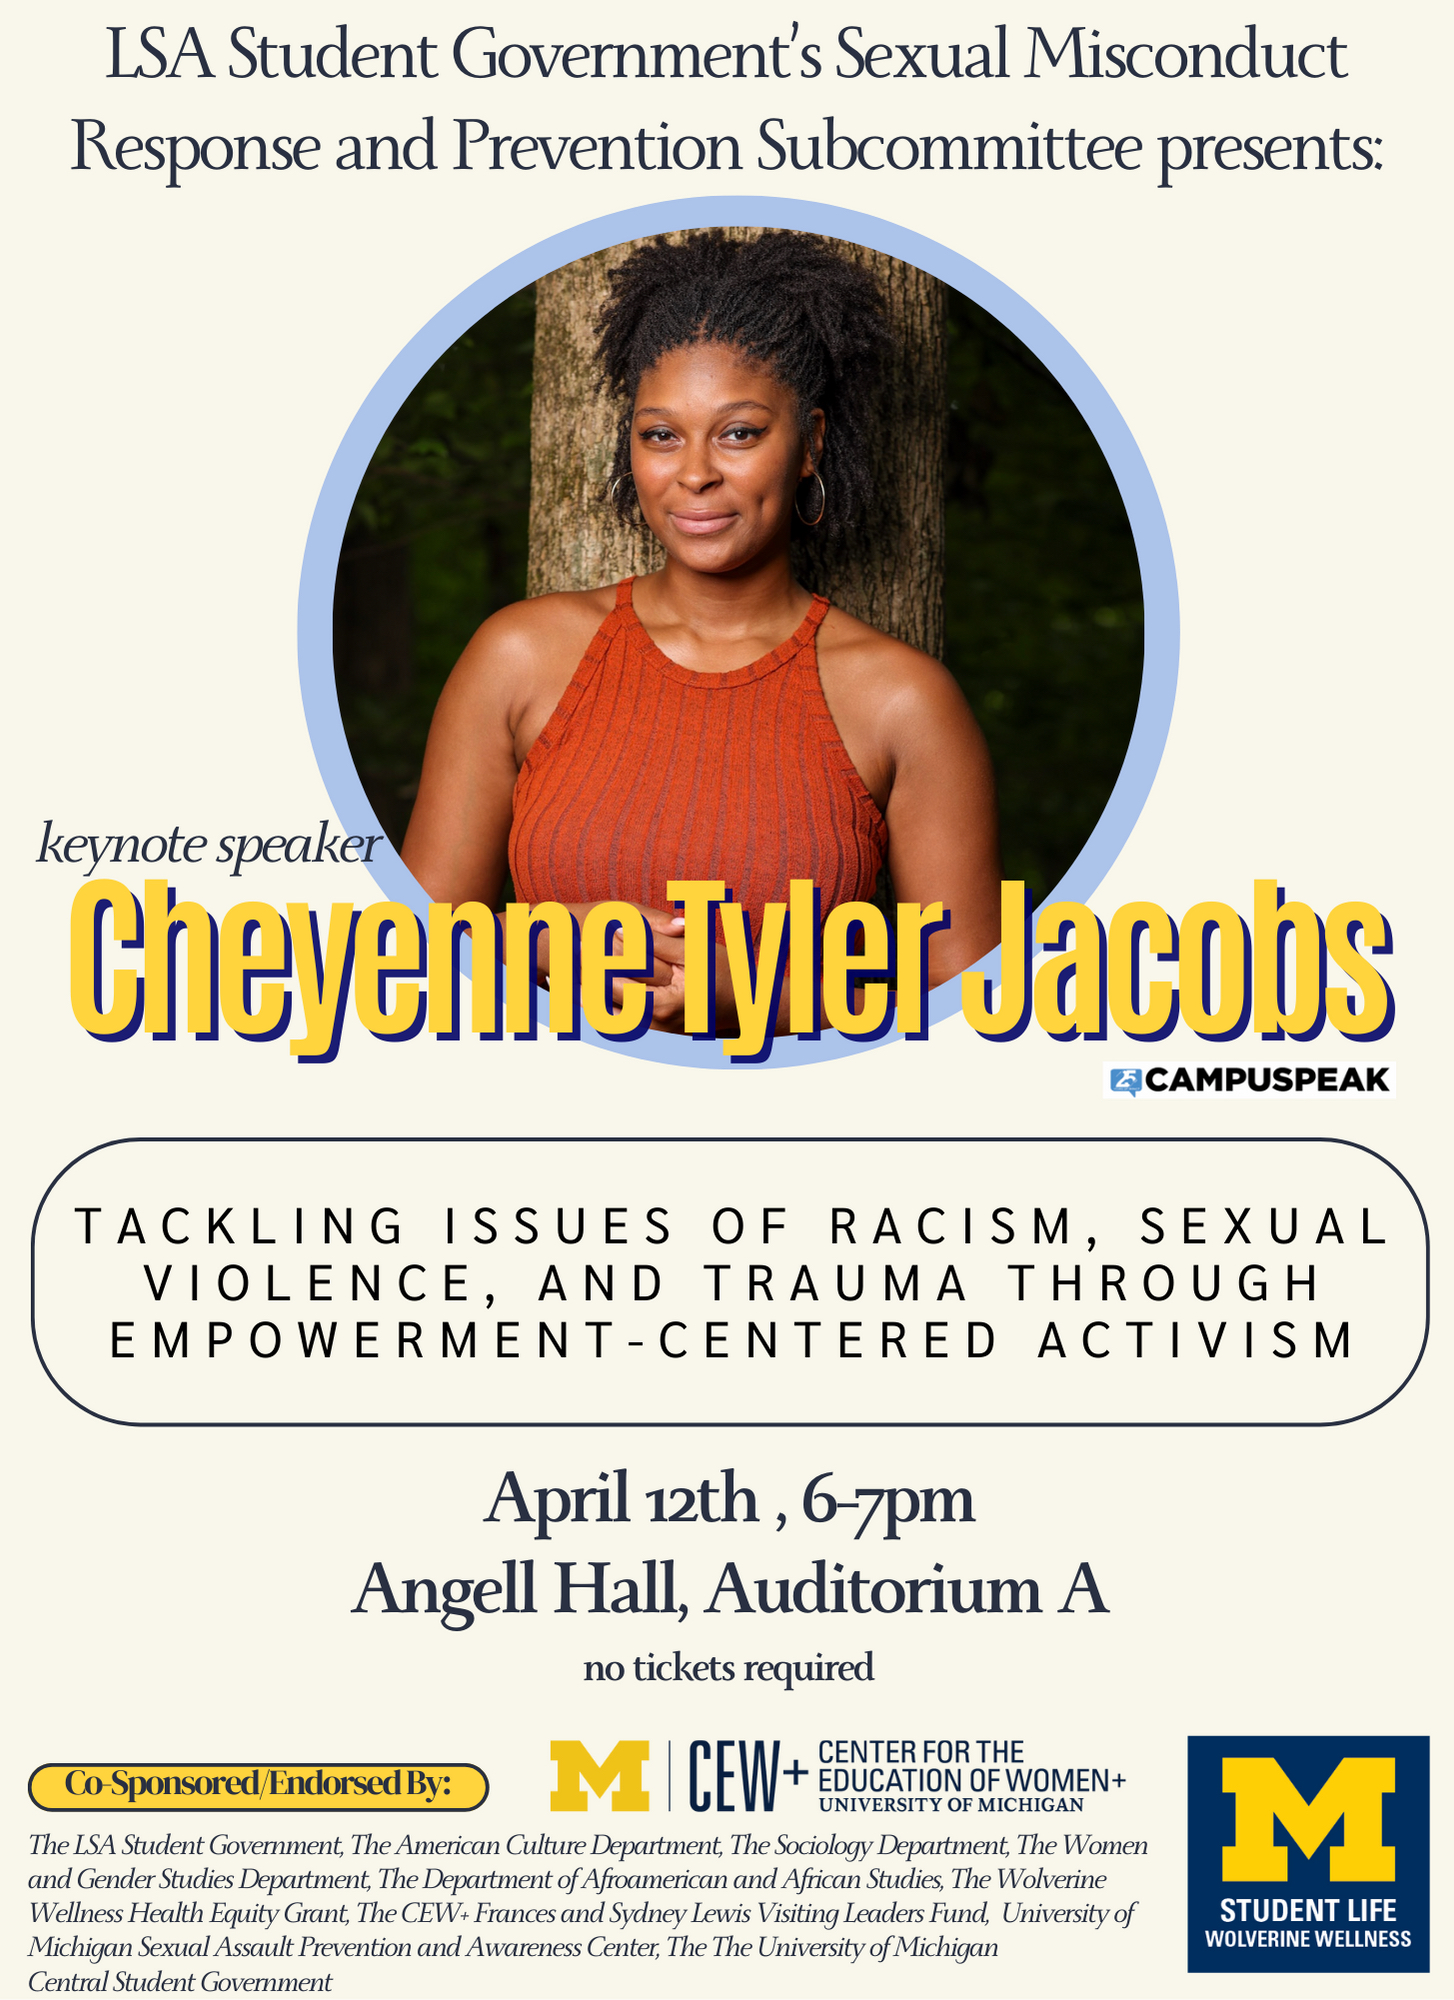 To honor Sexual Assault Awareness Month, LSA Student Government’s Sexual Misconduct Response and Prevention Subcommittee is hosting keynote speaker, Cheyenne Tyler Jacobs.